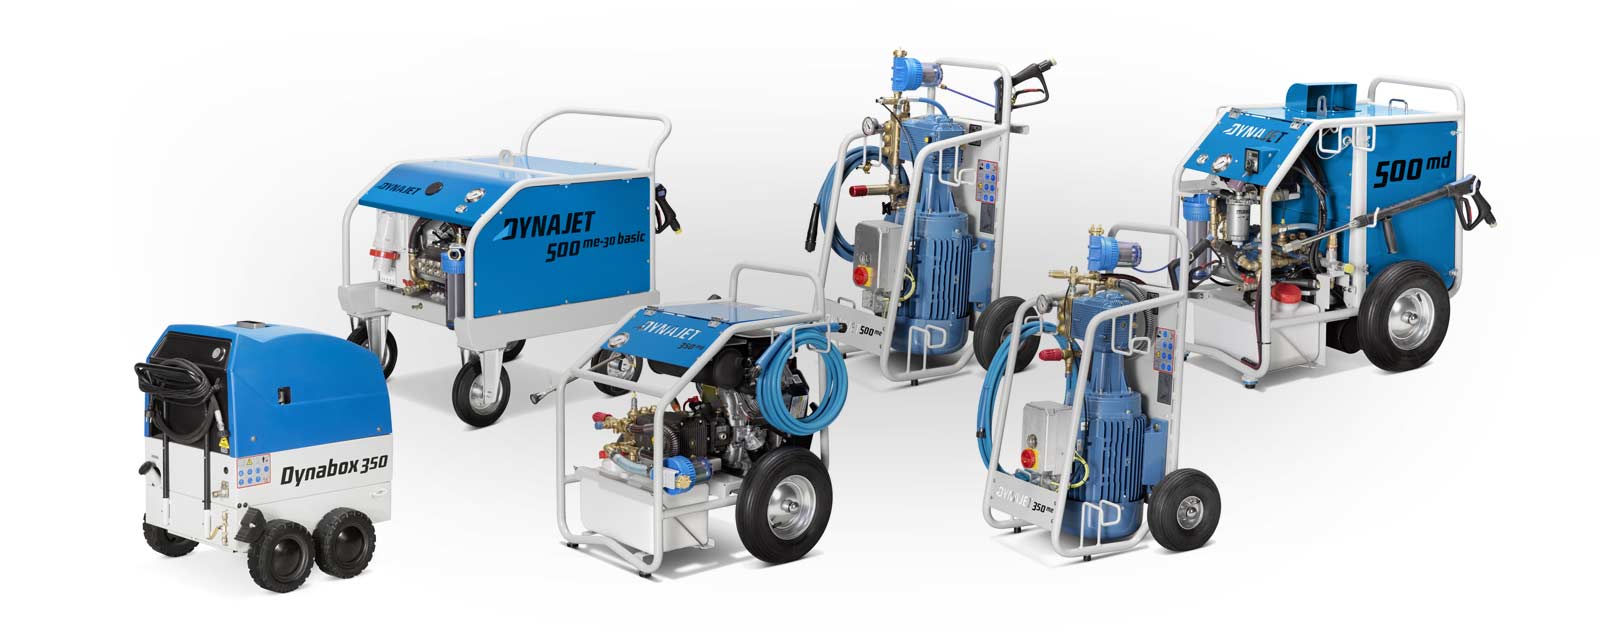 The DYNAJET trolleys with a working pressure of 150 to 1,000 bar are small, easy to transport and flexible for countless situations